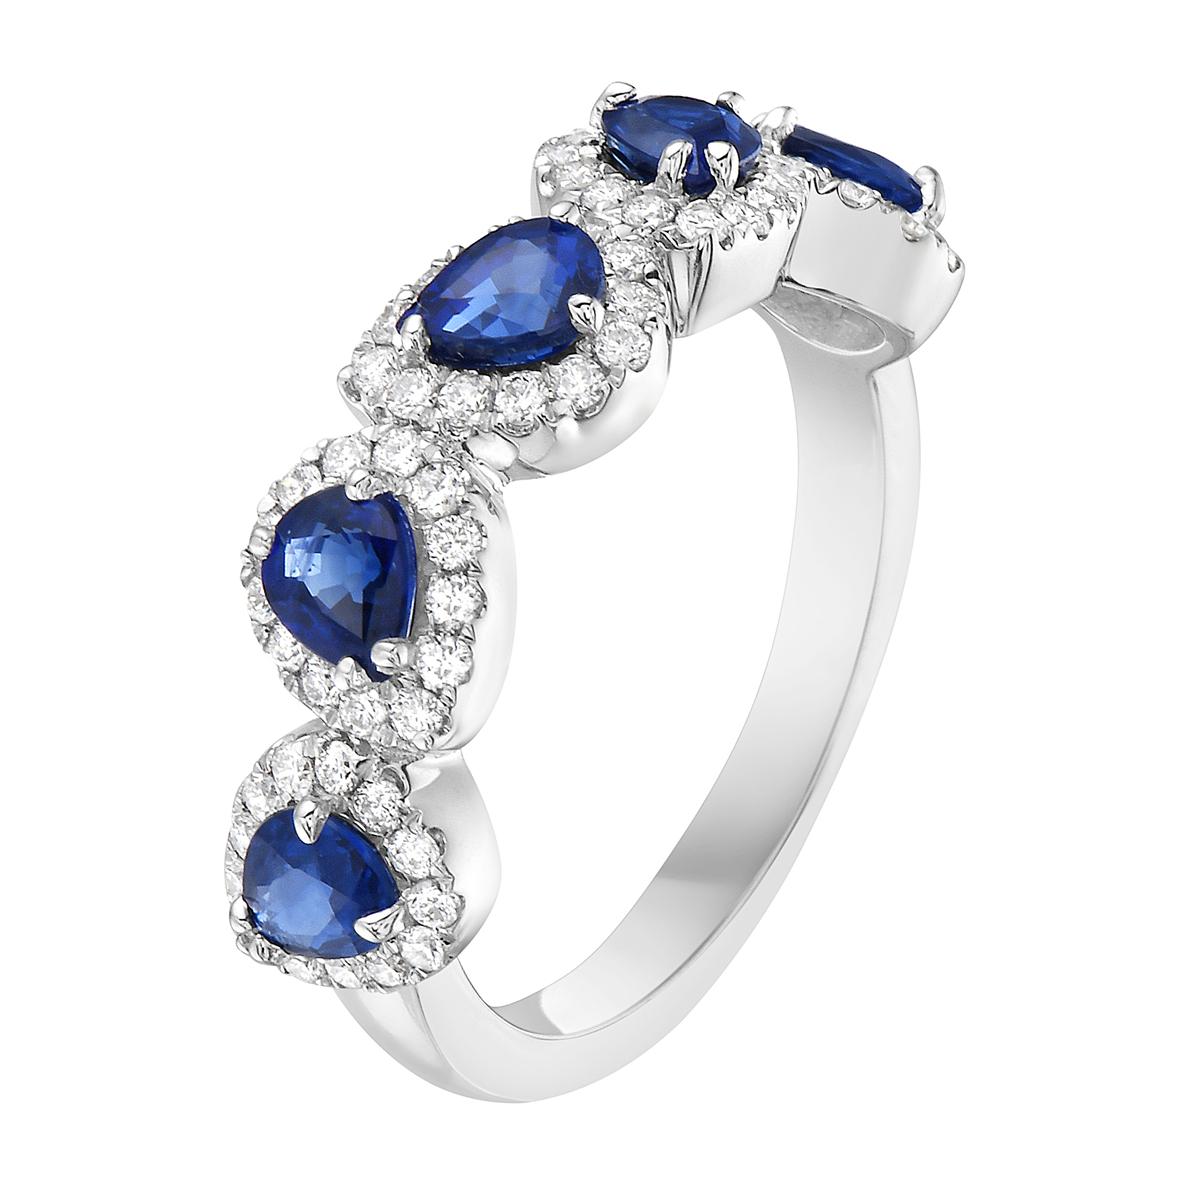 With this exquisite diamond and sapphire ring, style and glamour are in the spotlight. This 18-karat diamond and sapphire ring is made from 3.8 grams of gold. The top is adorned with one row of VS2, G color diamonds, made out of 65 diamonds totaling